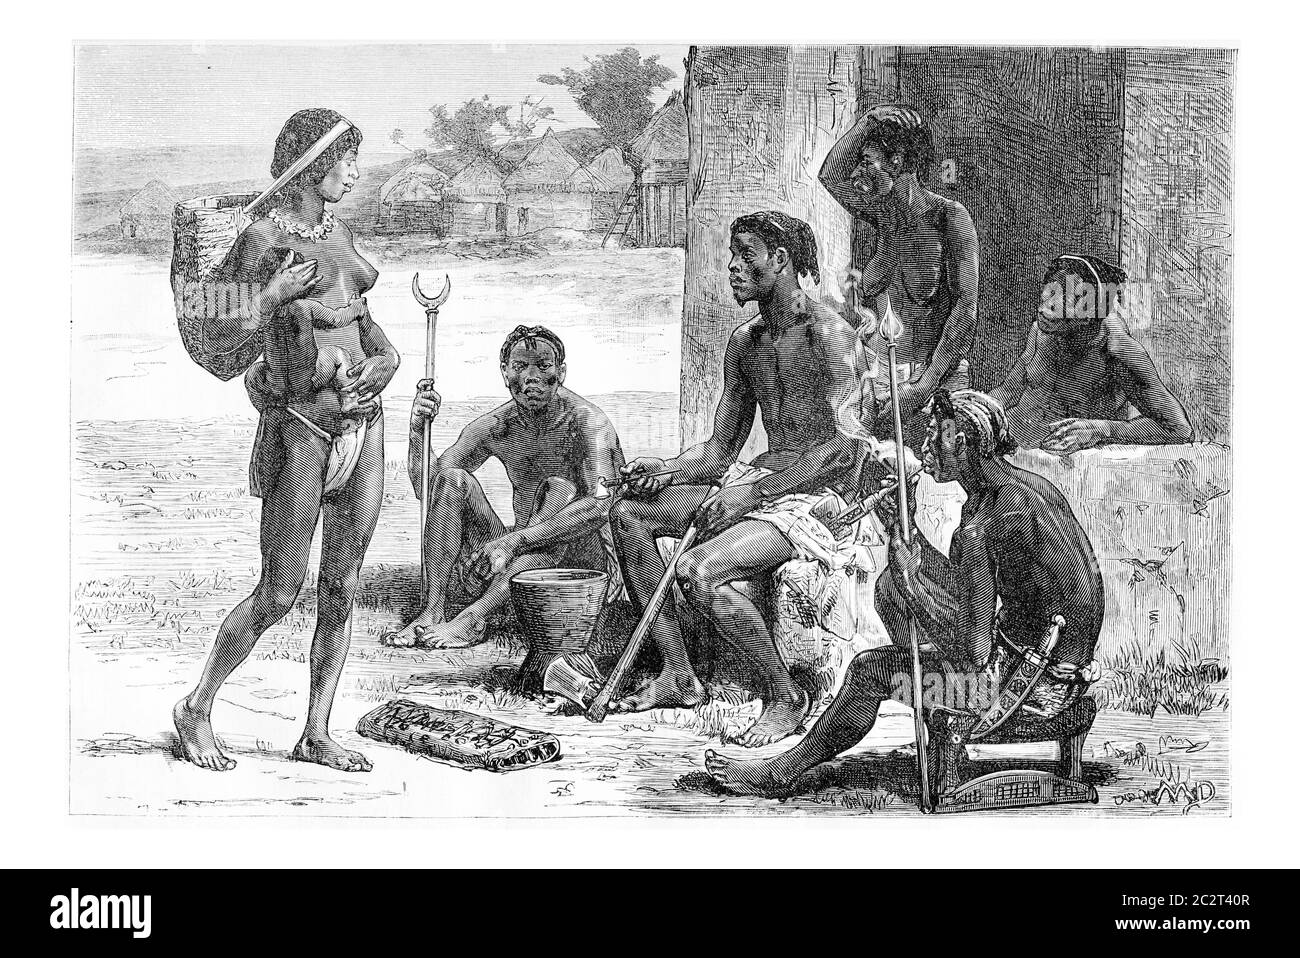 Men, Women and Tools of the Luchazes, in Angola, Southern Africa, drawing by Maillart based on the English edition, vintage illustration. Le Tour du M Stock Photo